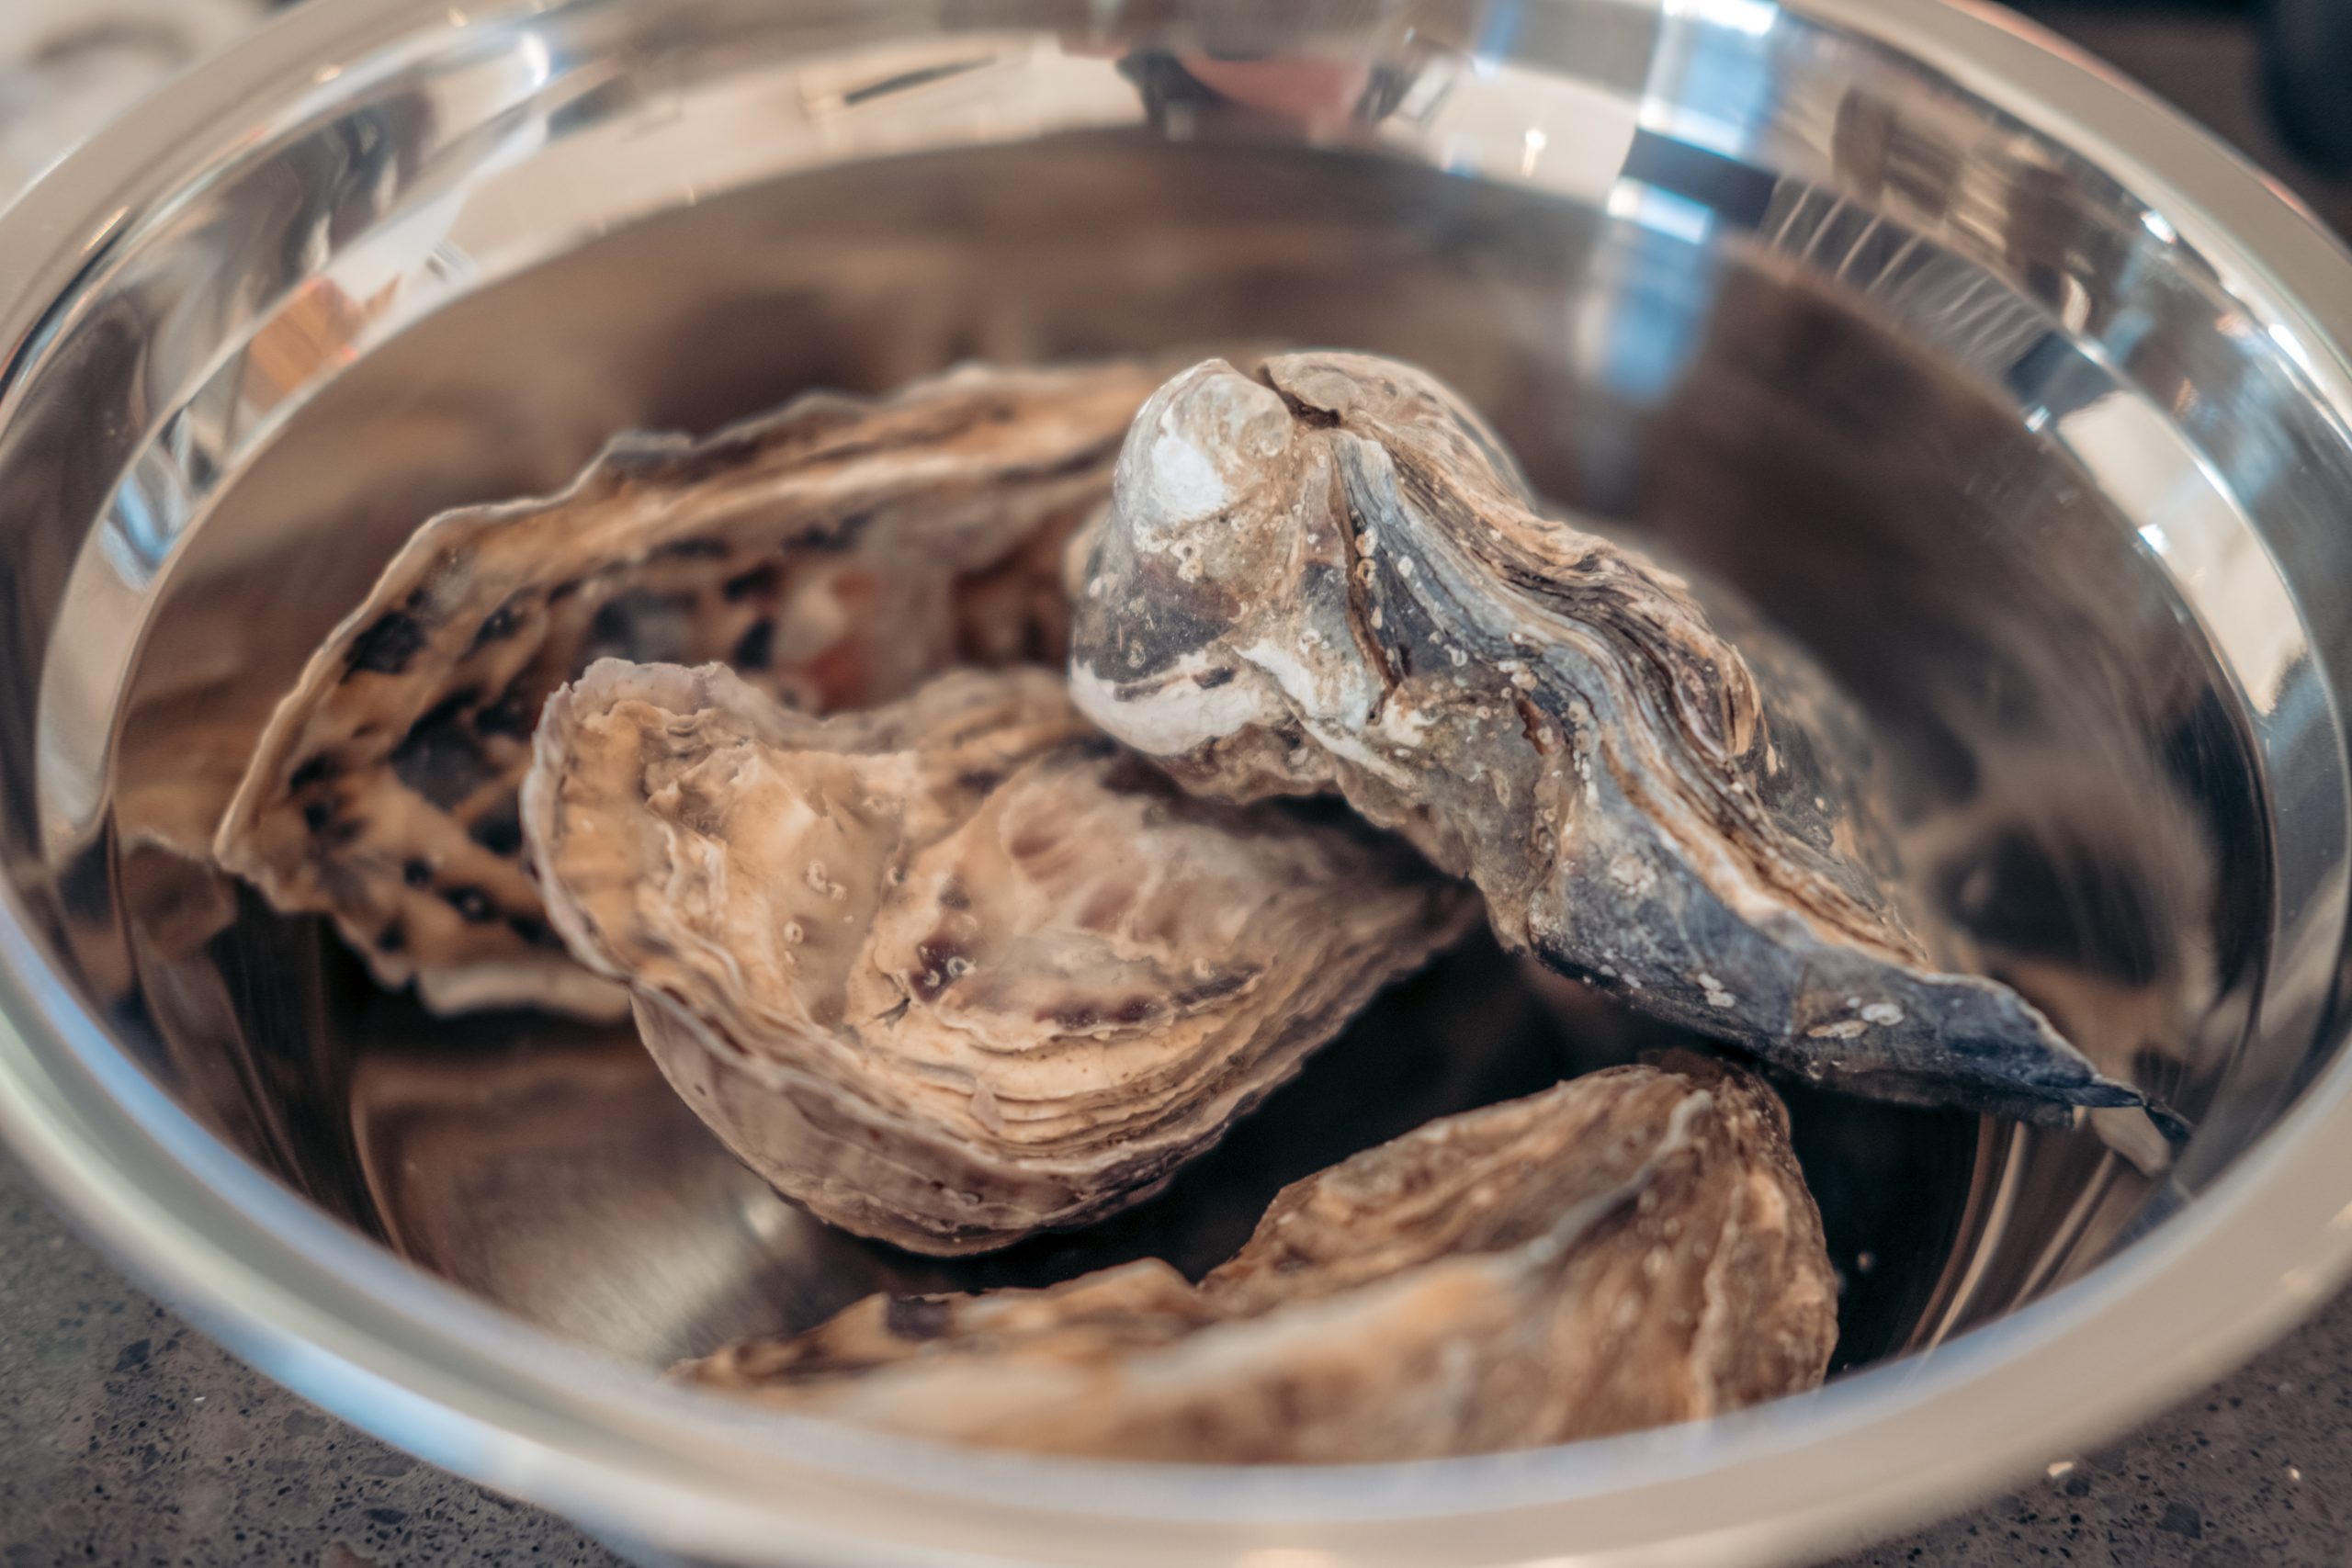 Oysters ready to be ready and eaten in a bowl